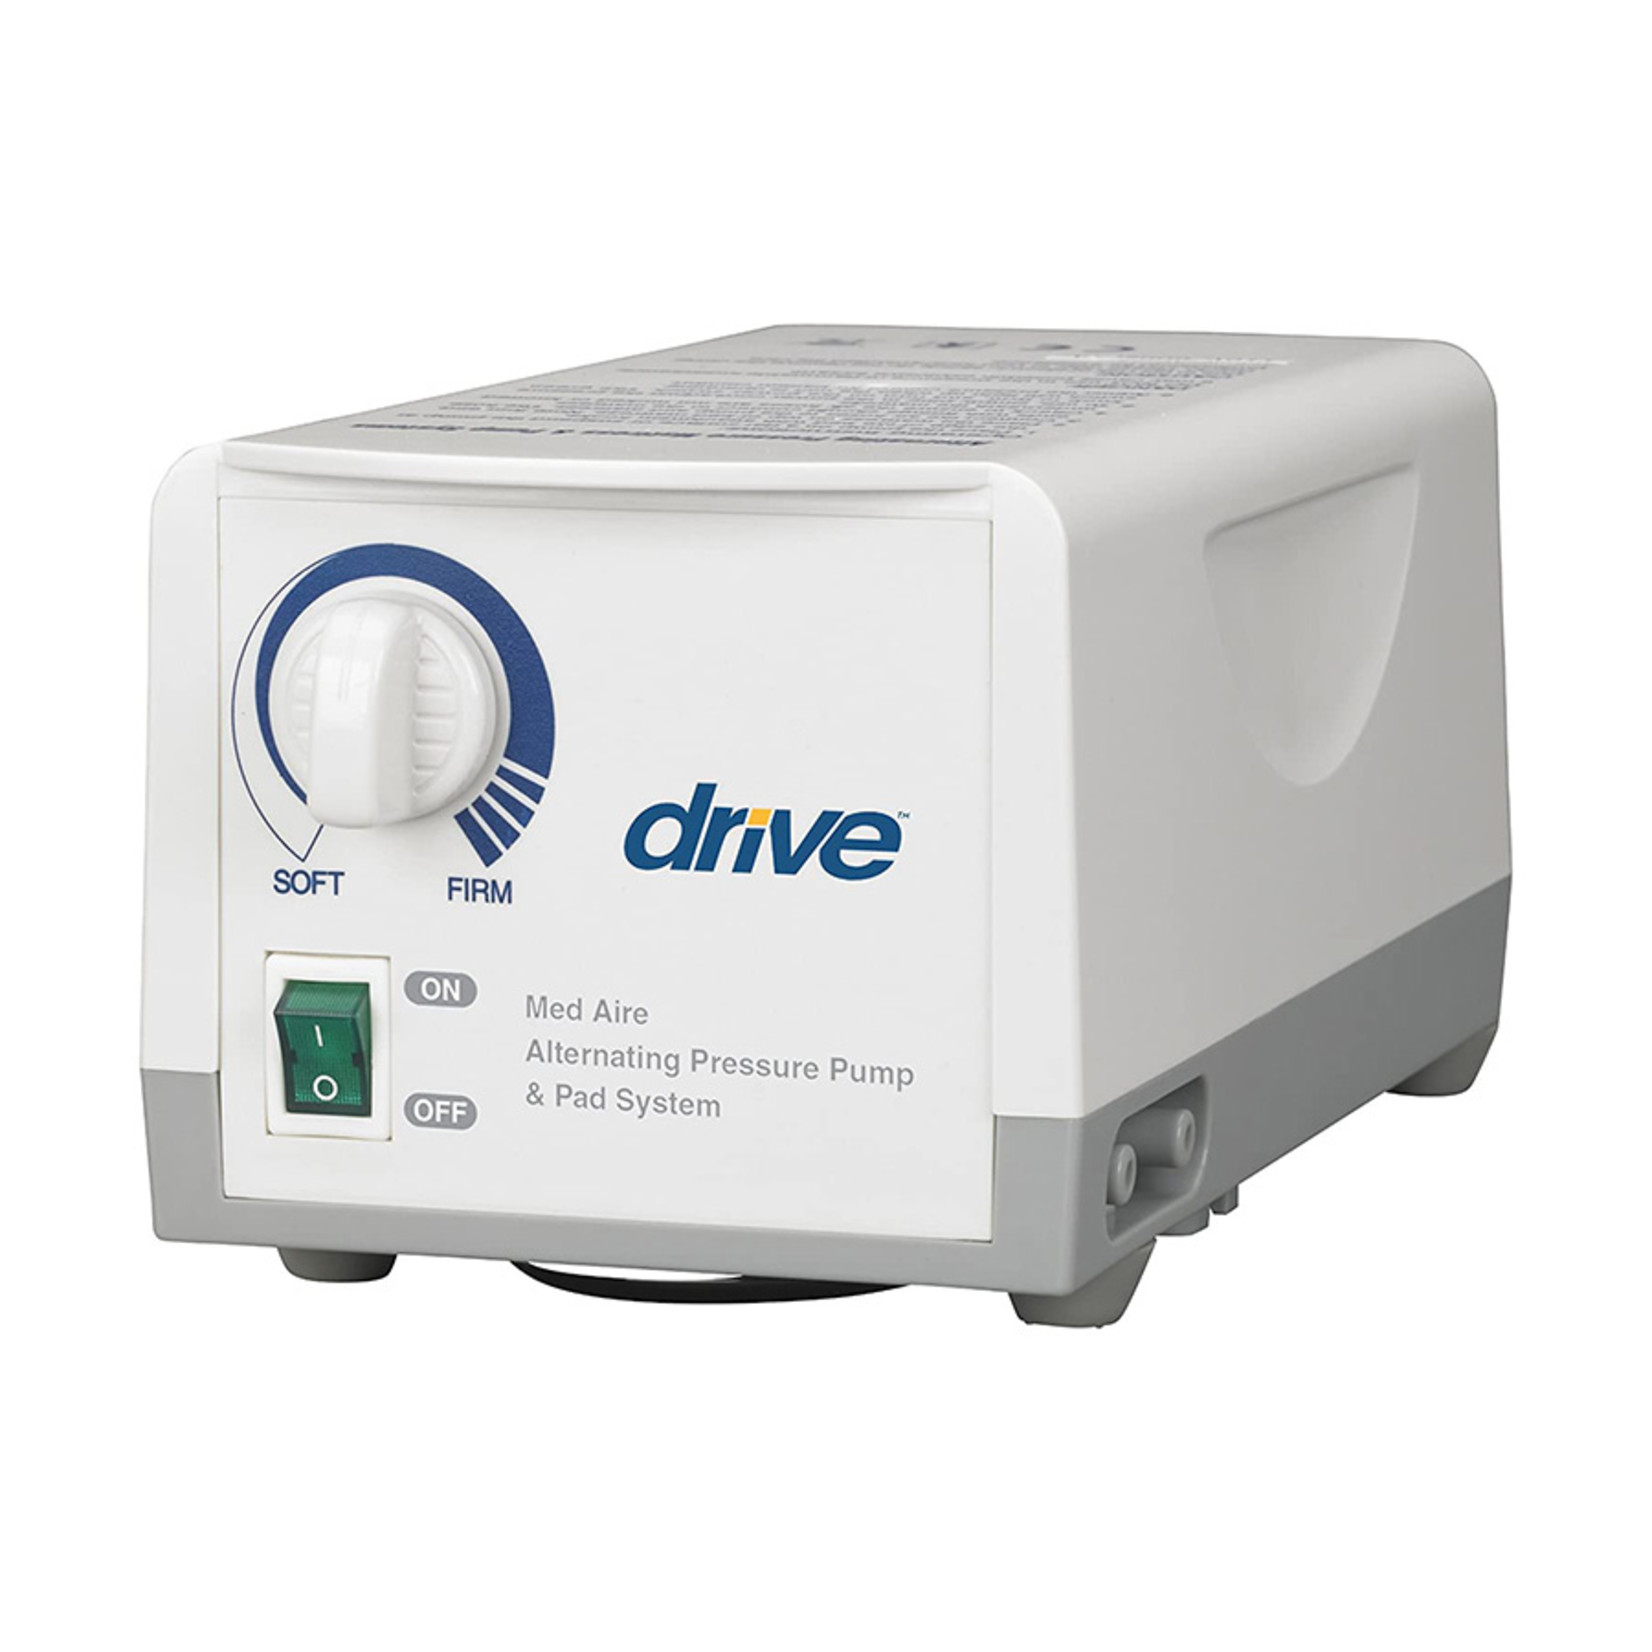 Drive Med-Aire Alternating Pressure Pump and Pad System